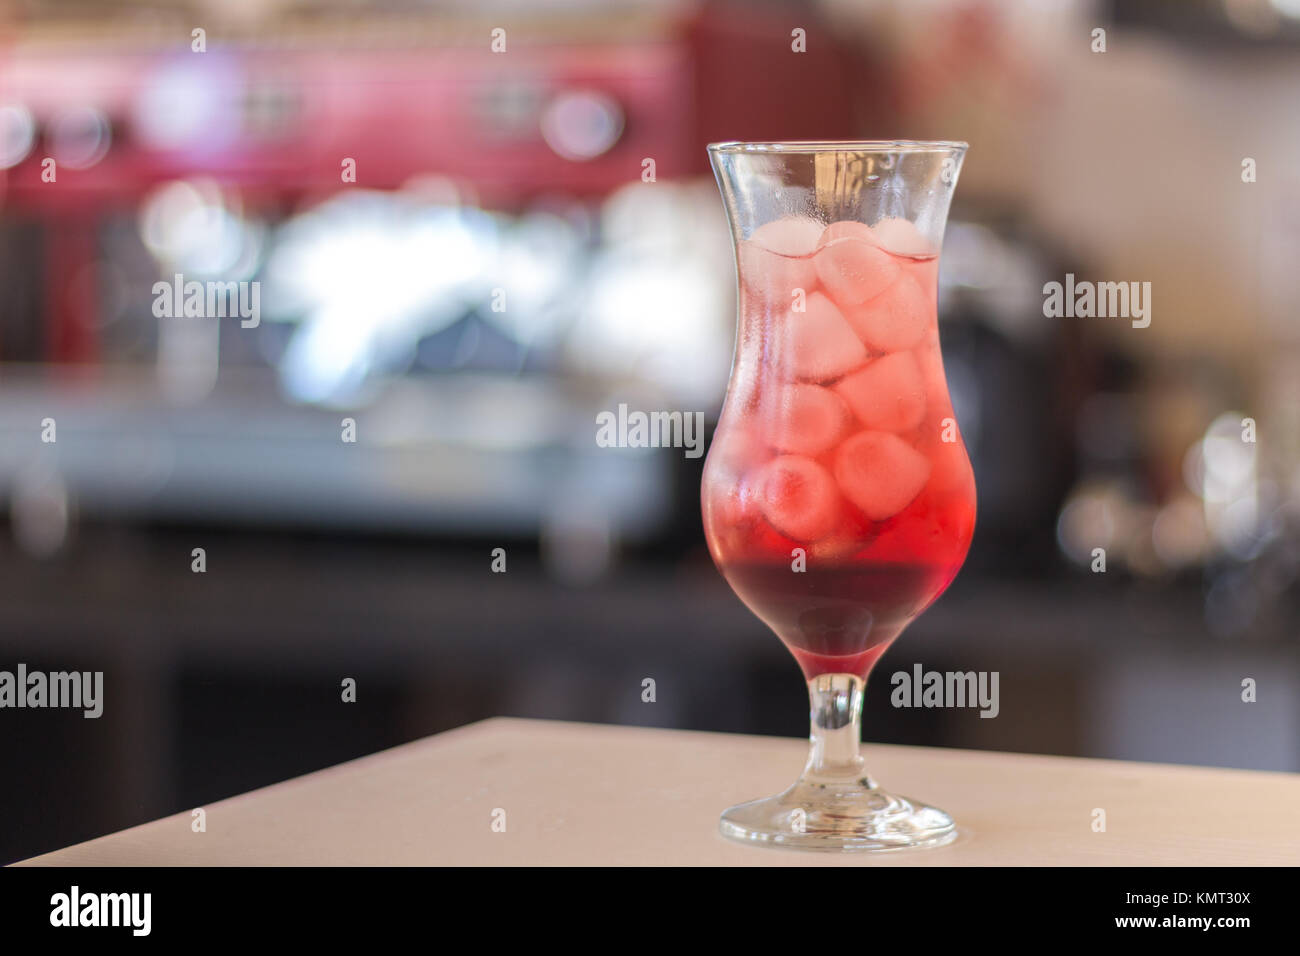 A glass of Italian Soda on a white table. Stock Photo